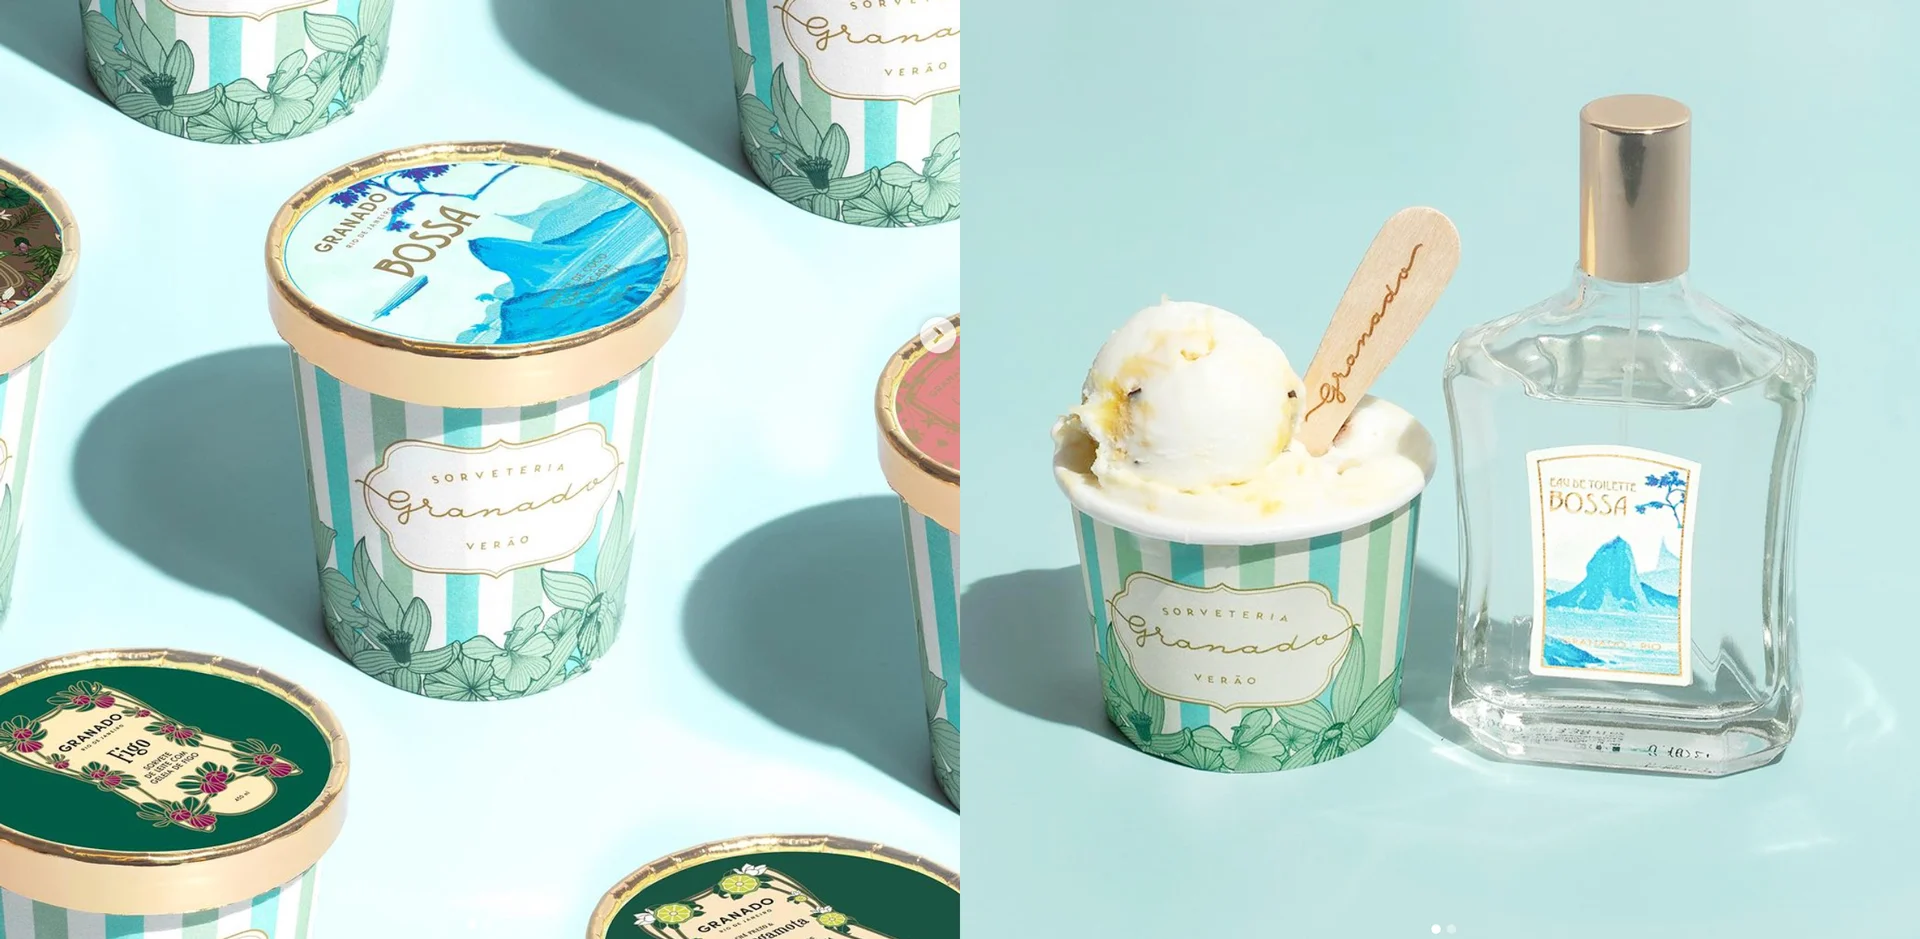 Luxury ice cream and perfume product display with branding, featuring scooped ice cream in a cup next to elegantly packaged ice cream containers and a clear perfume bottle on a light blue background.